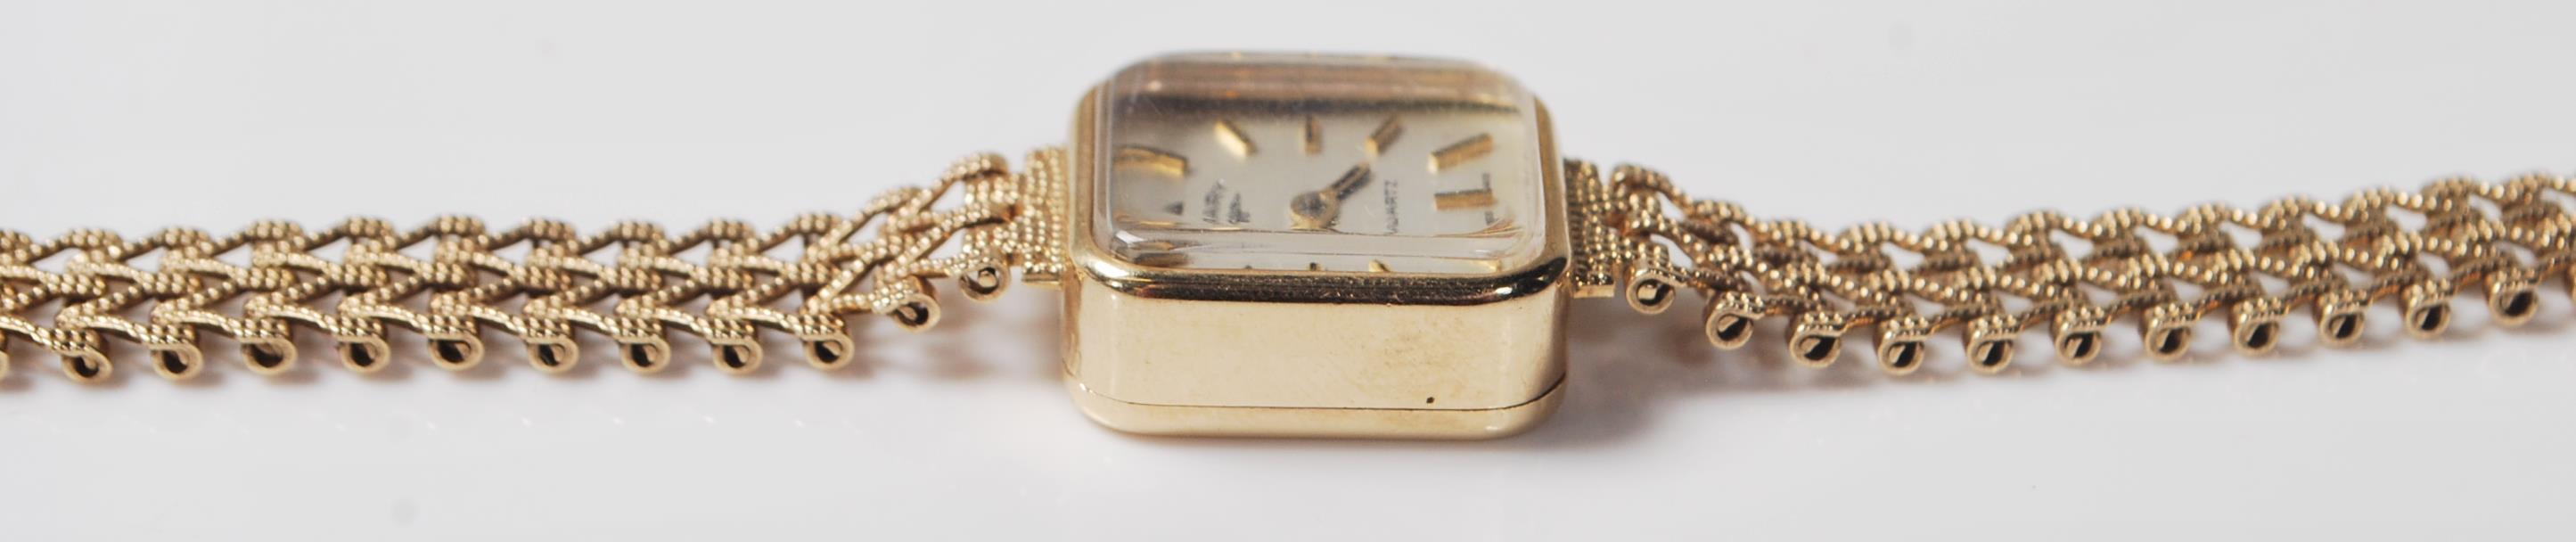 9CT GOLD LADIES ROTARY COCKTAIL WATCH - Image 7 of 9